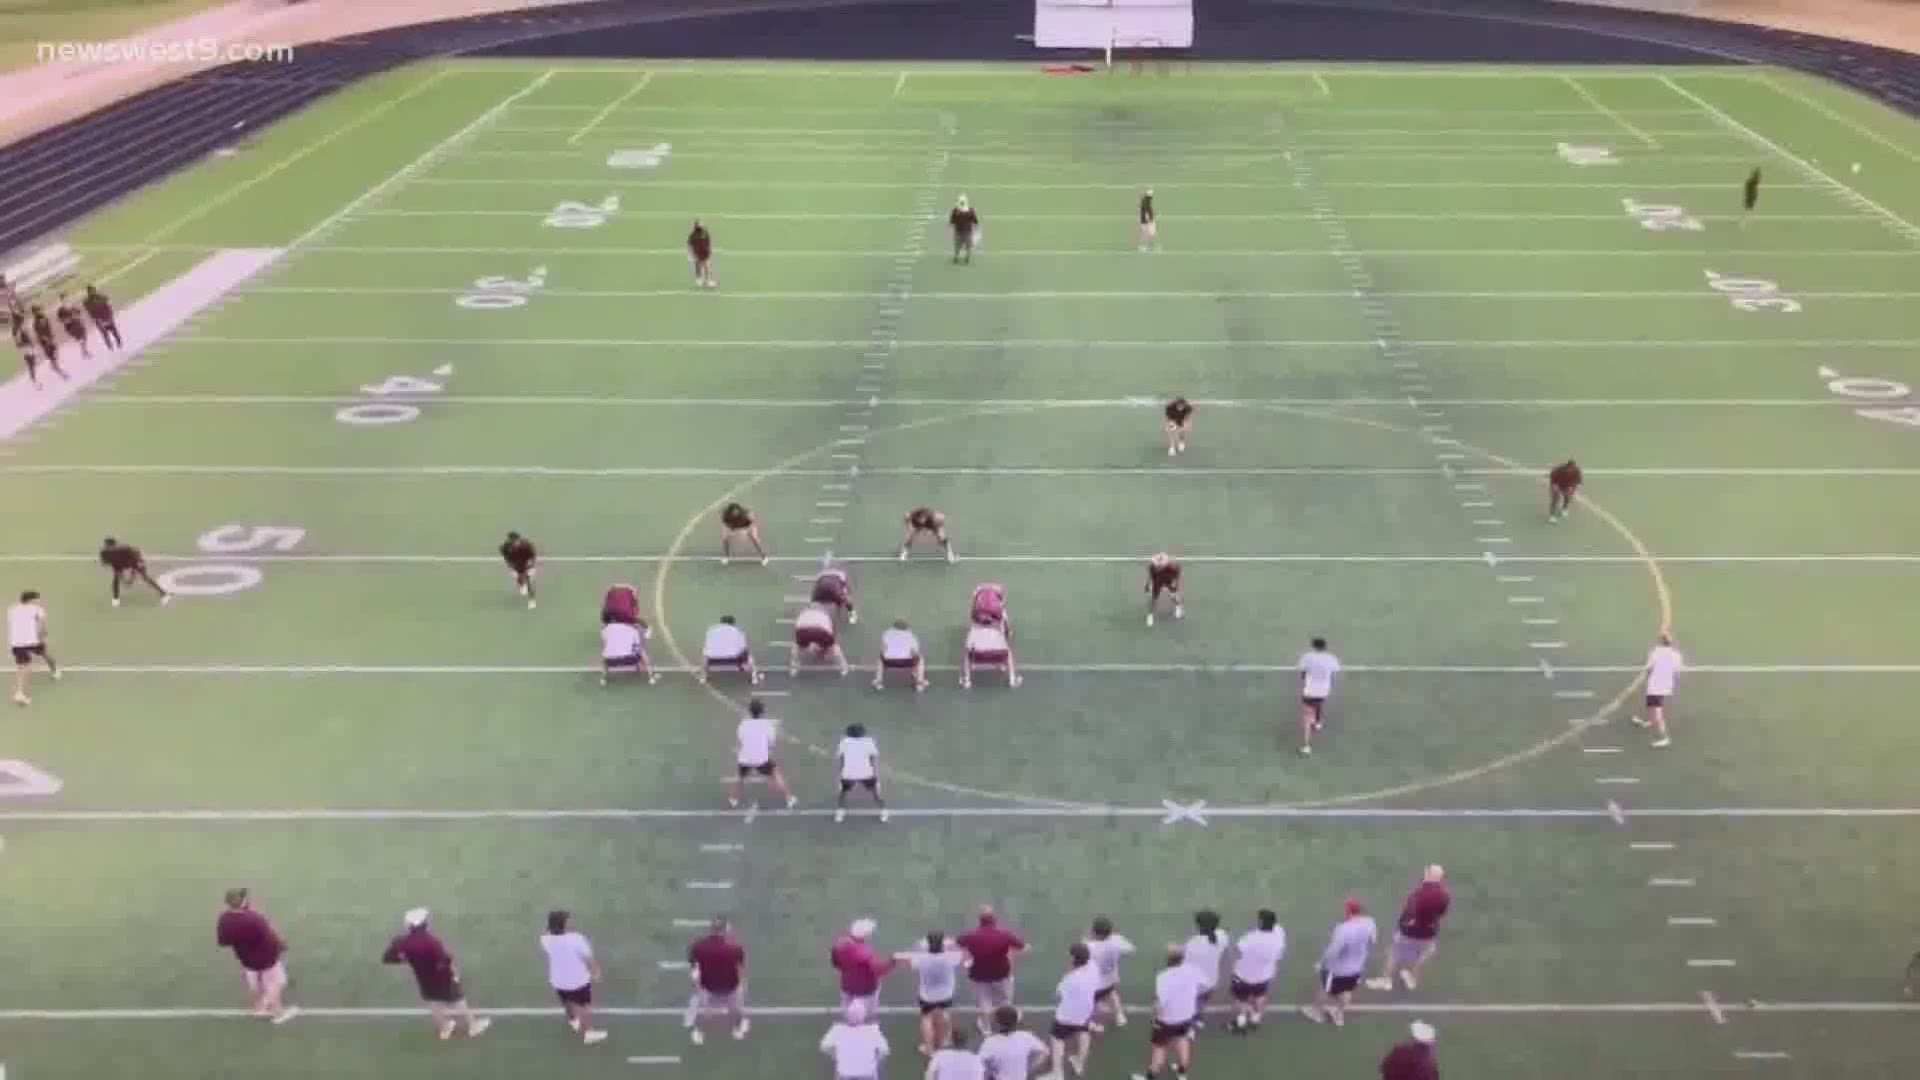 Even though 5A & 6A football programs across Texas had to start 2-A-Days a month later, schools are embracing change.